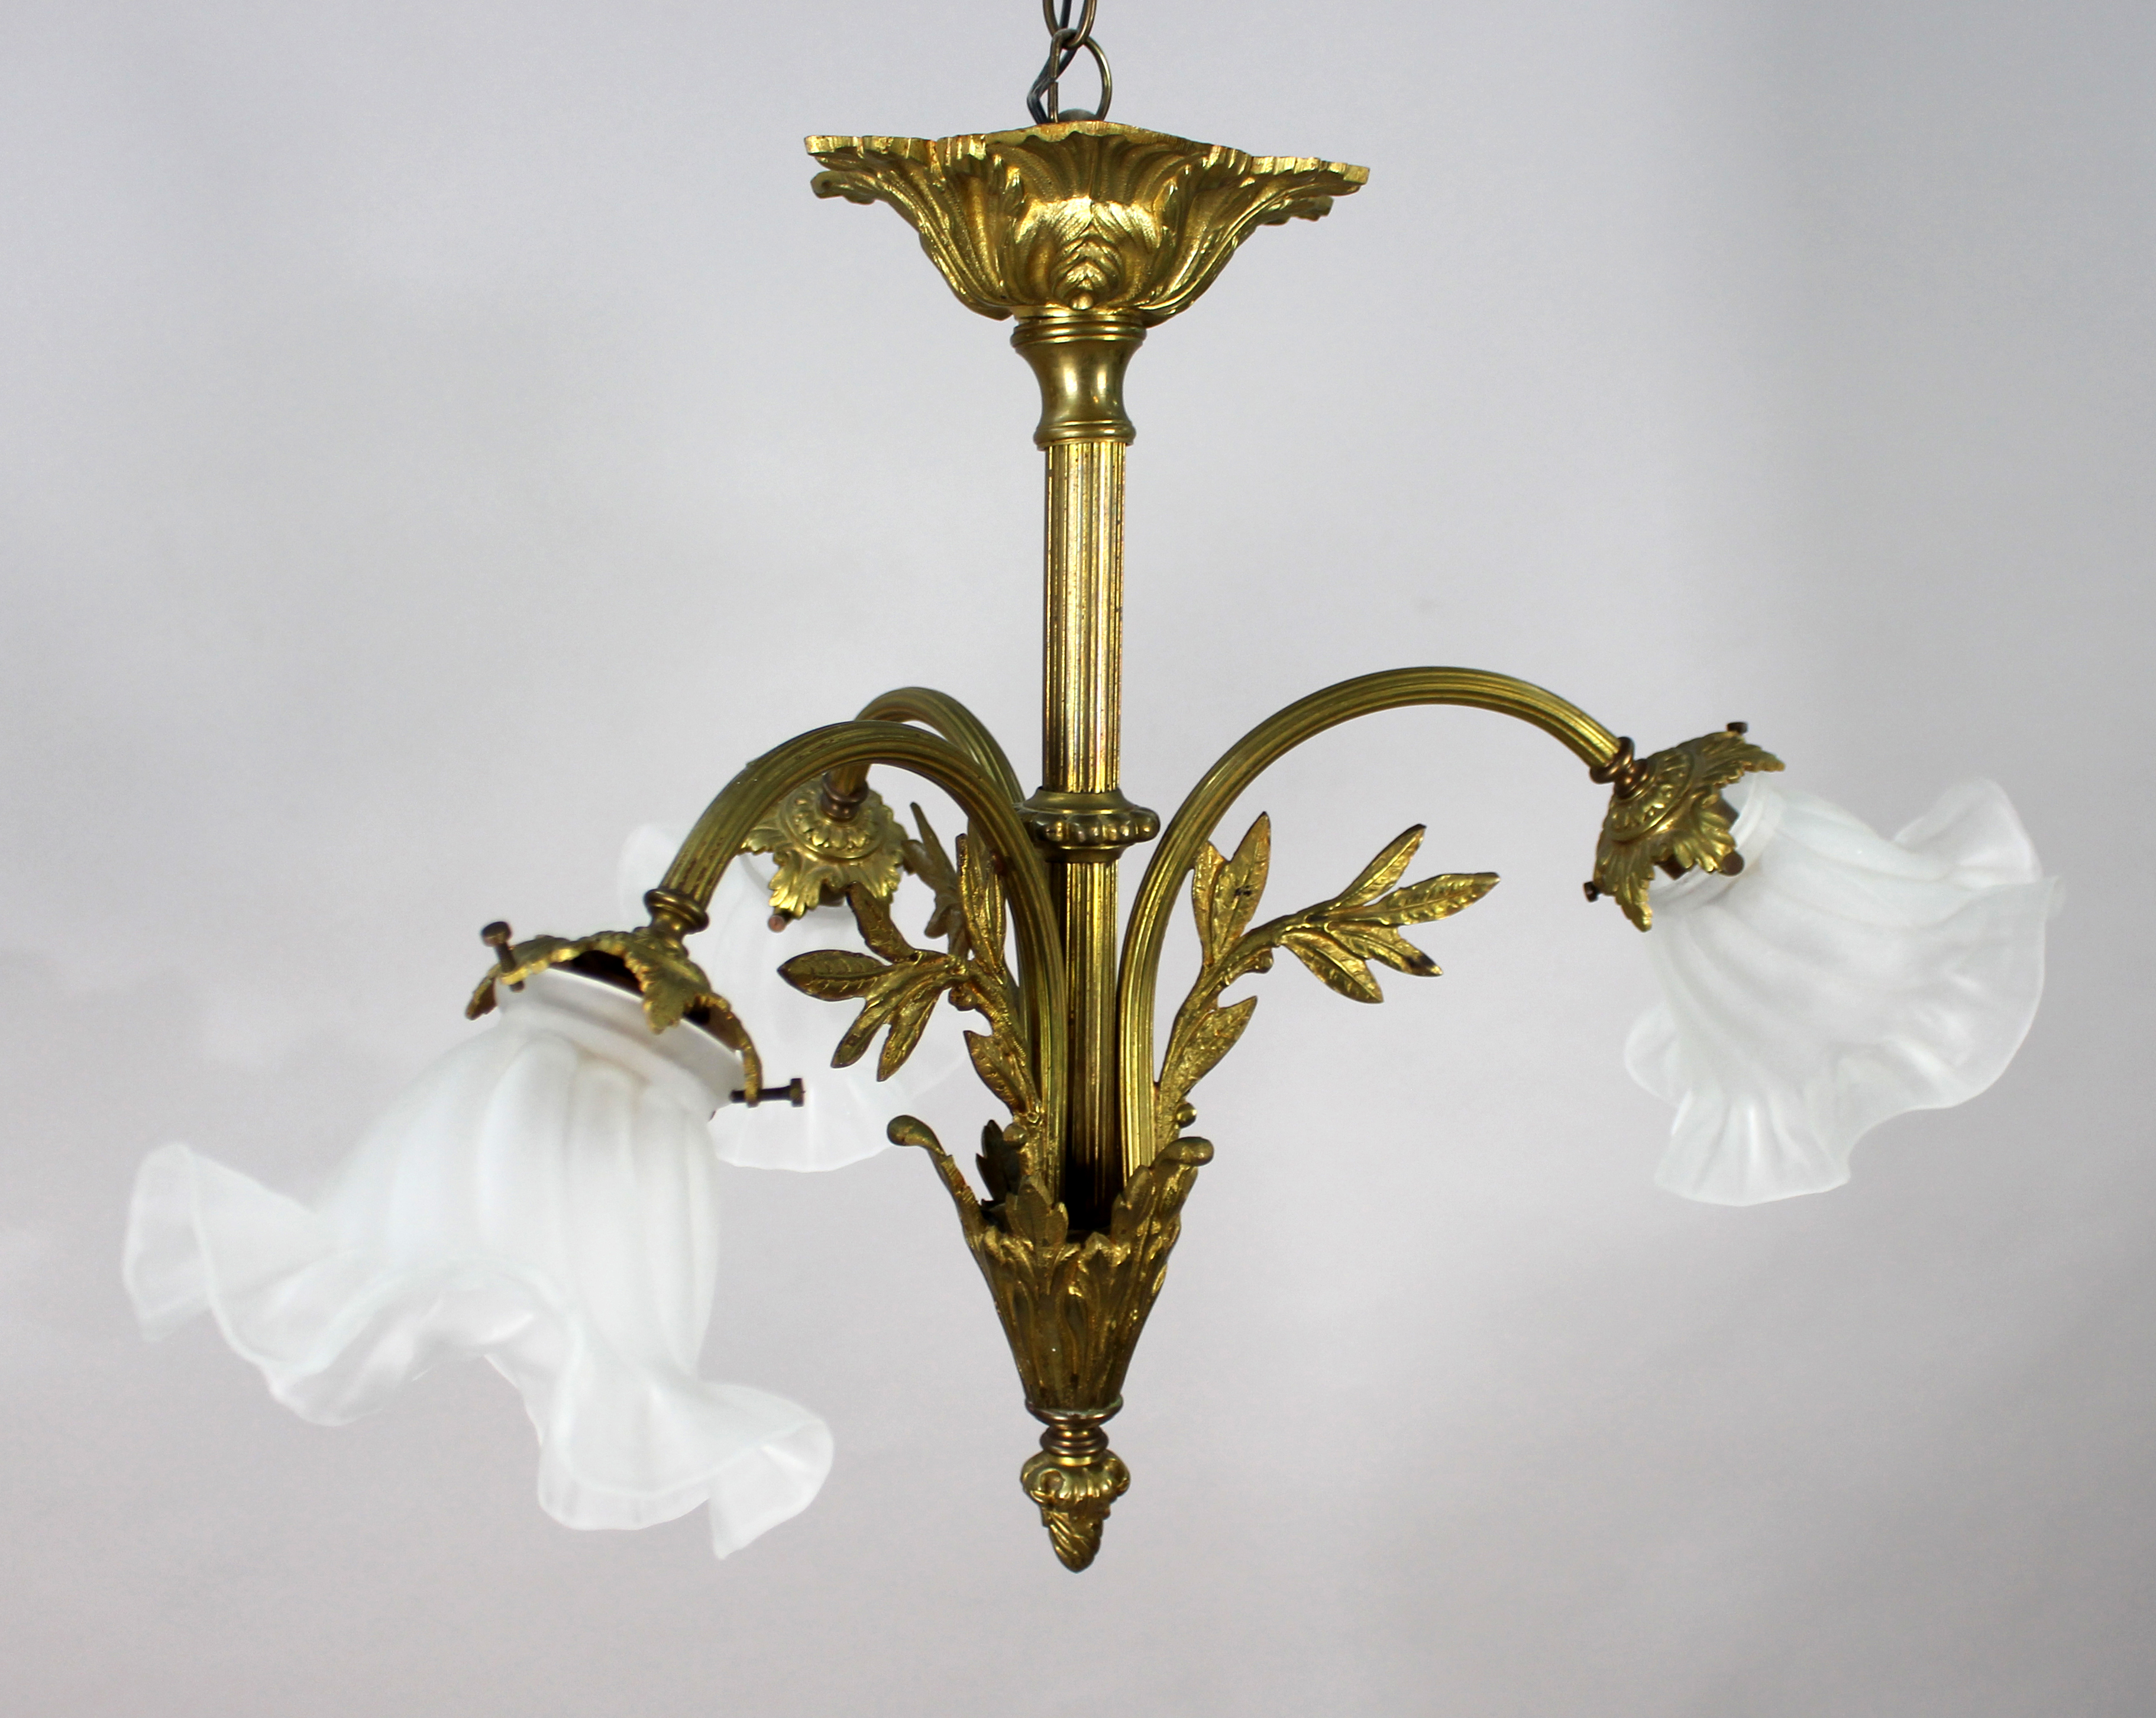 Antique French Gilt Metal 3 Light Chandelier - Image 3 of 9